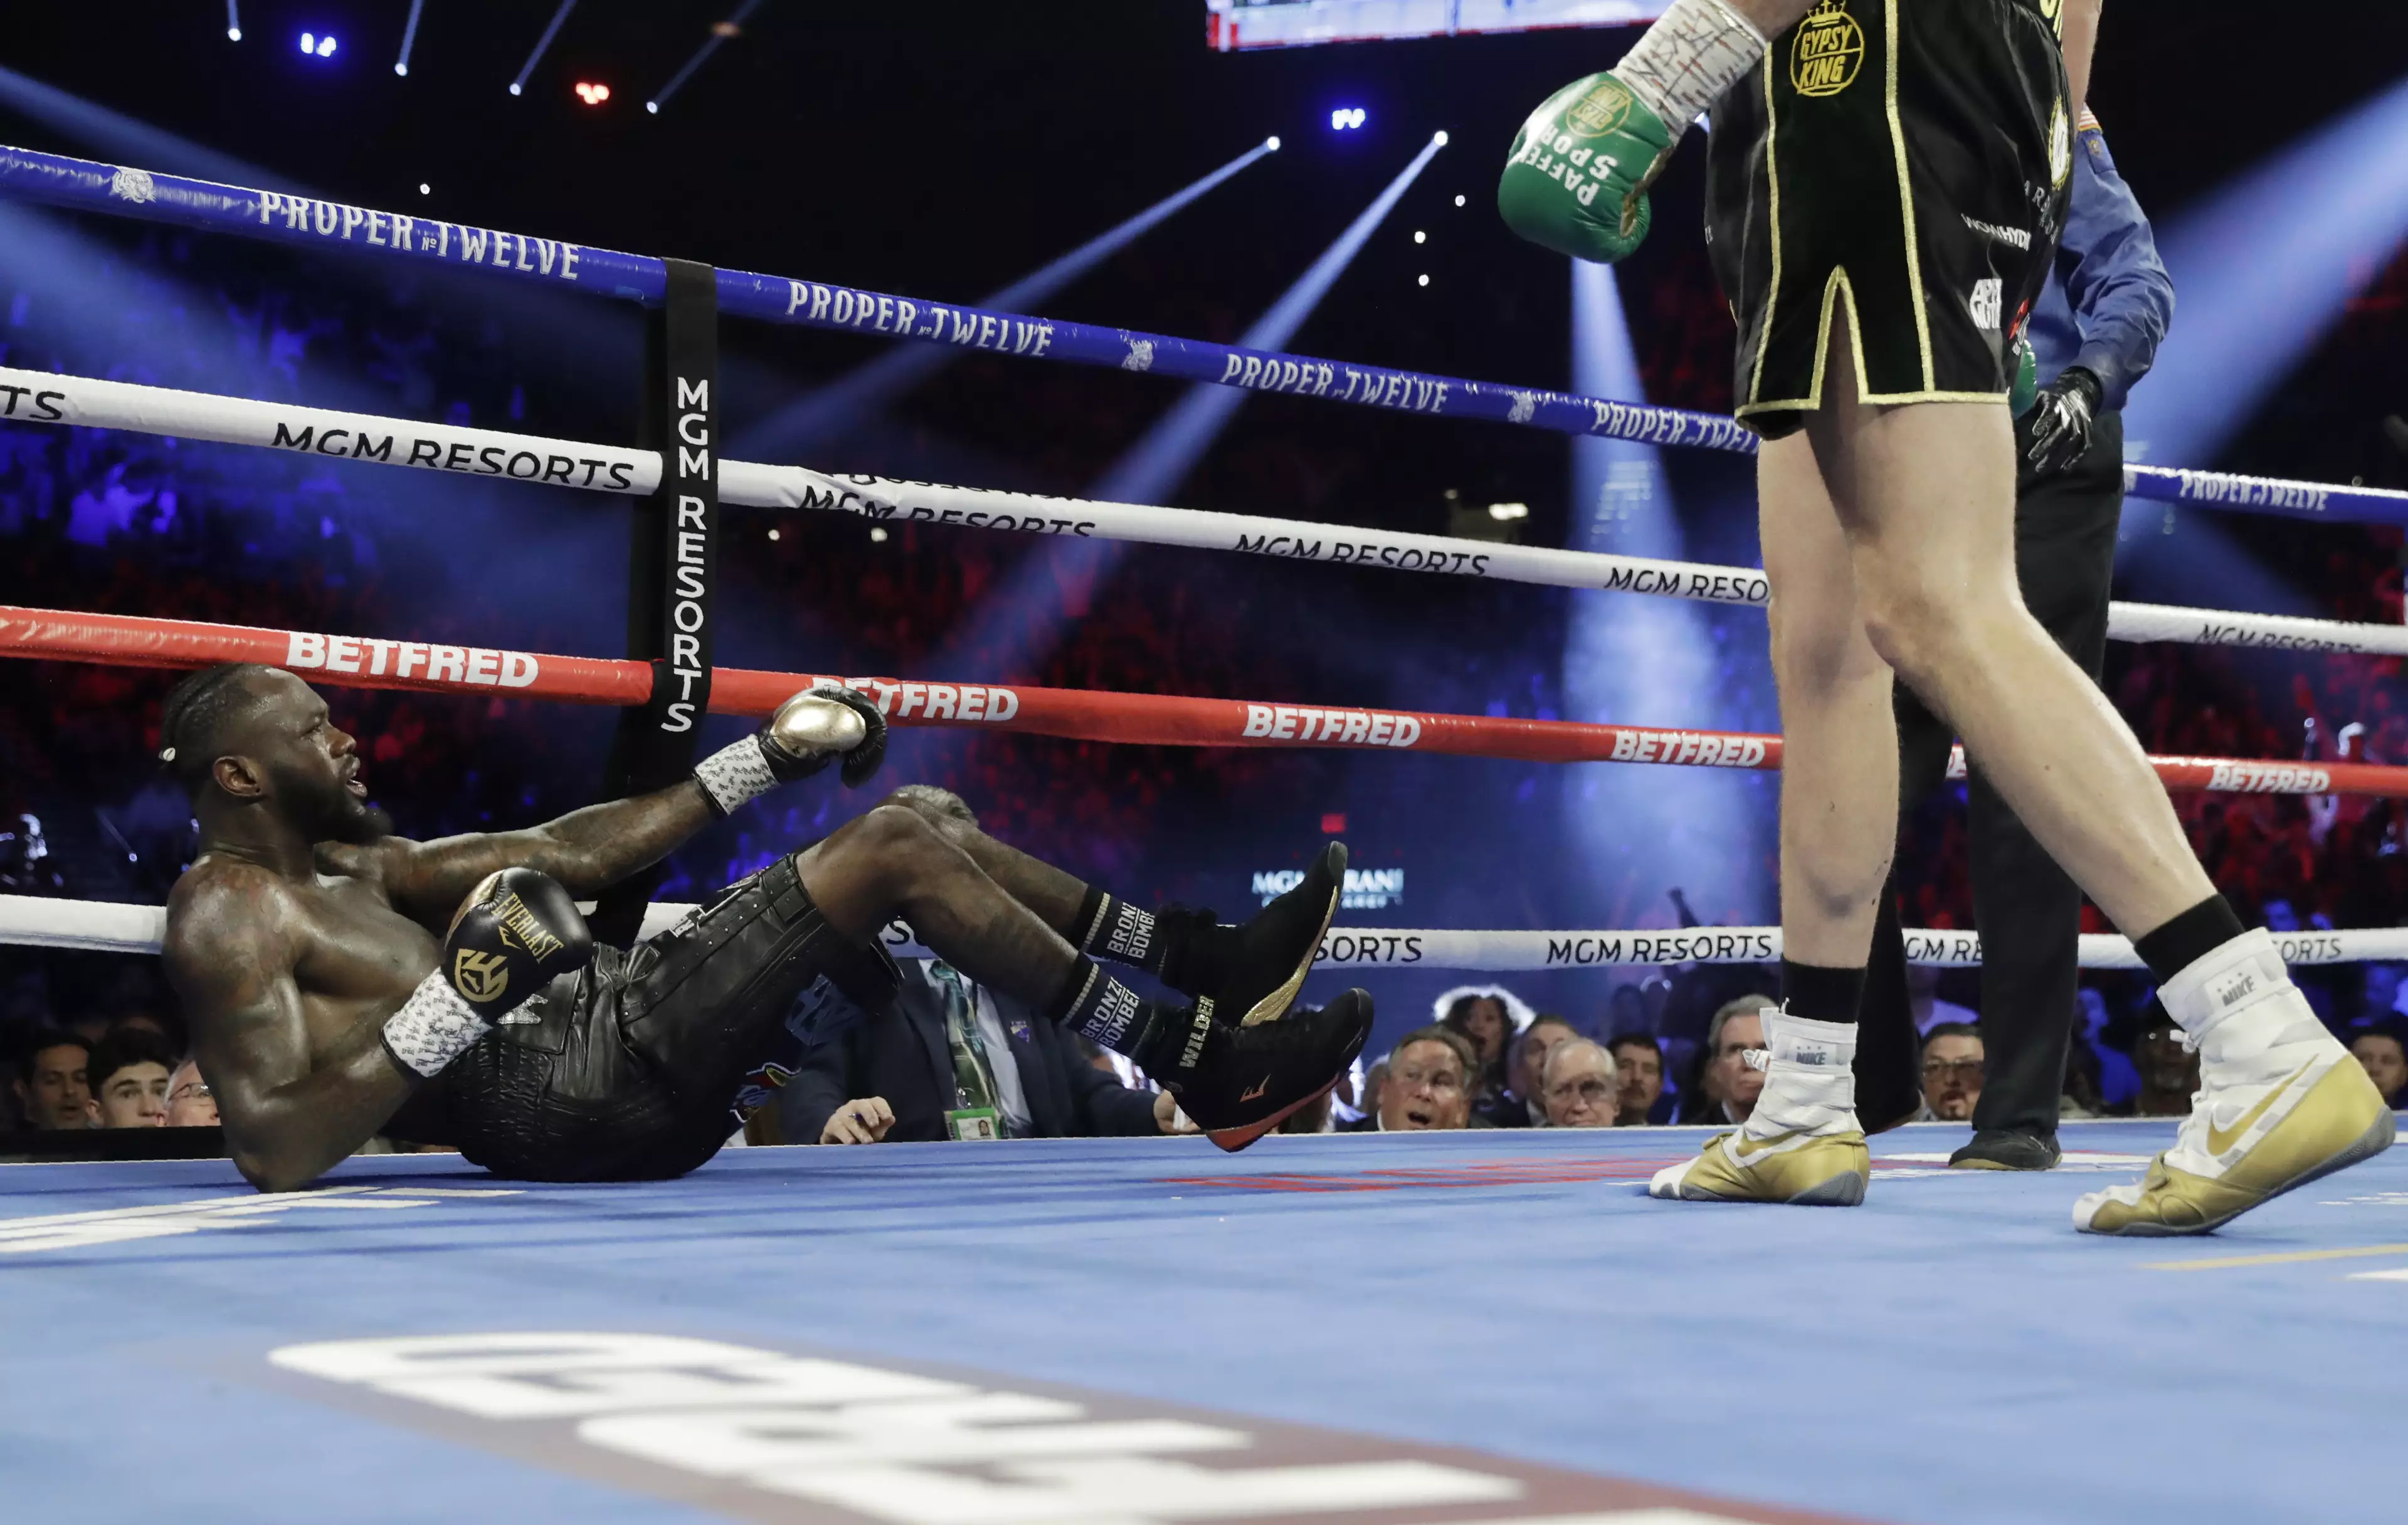 Wilder was twice knocked down to the canvas. Image: PA Images